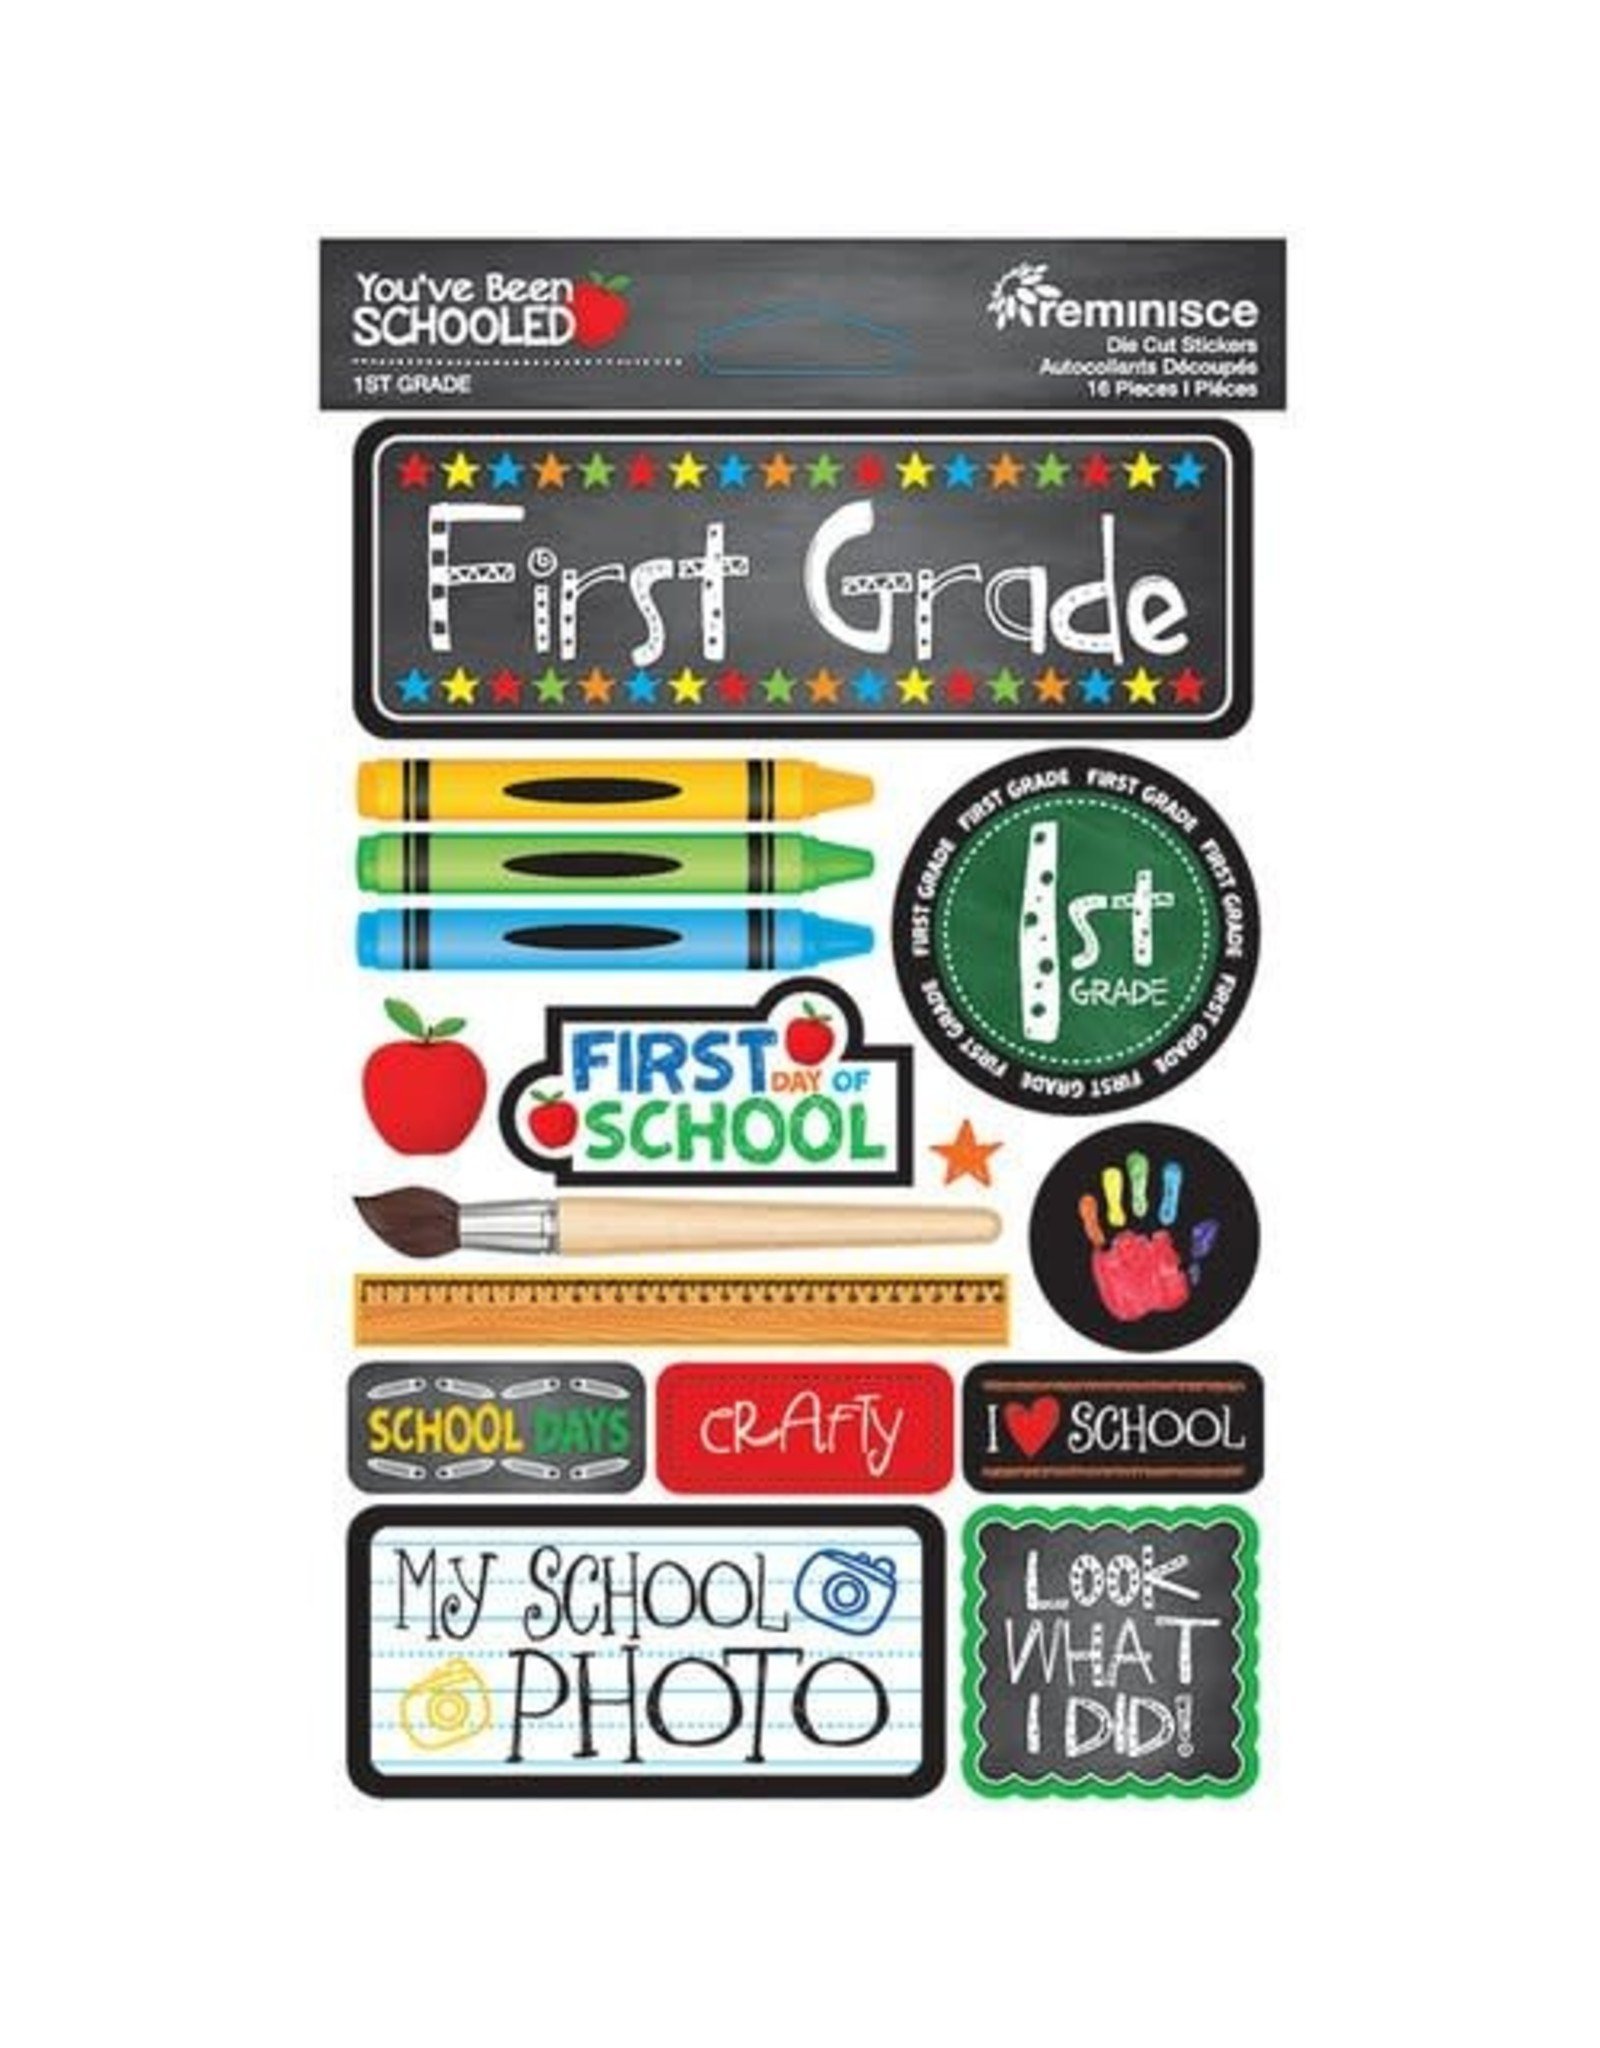 REMINISCE REMINISCE YOU'VE BEEN SCHOOLED FIRST GRADE 3D STICKERS